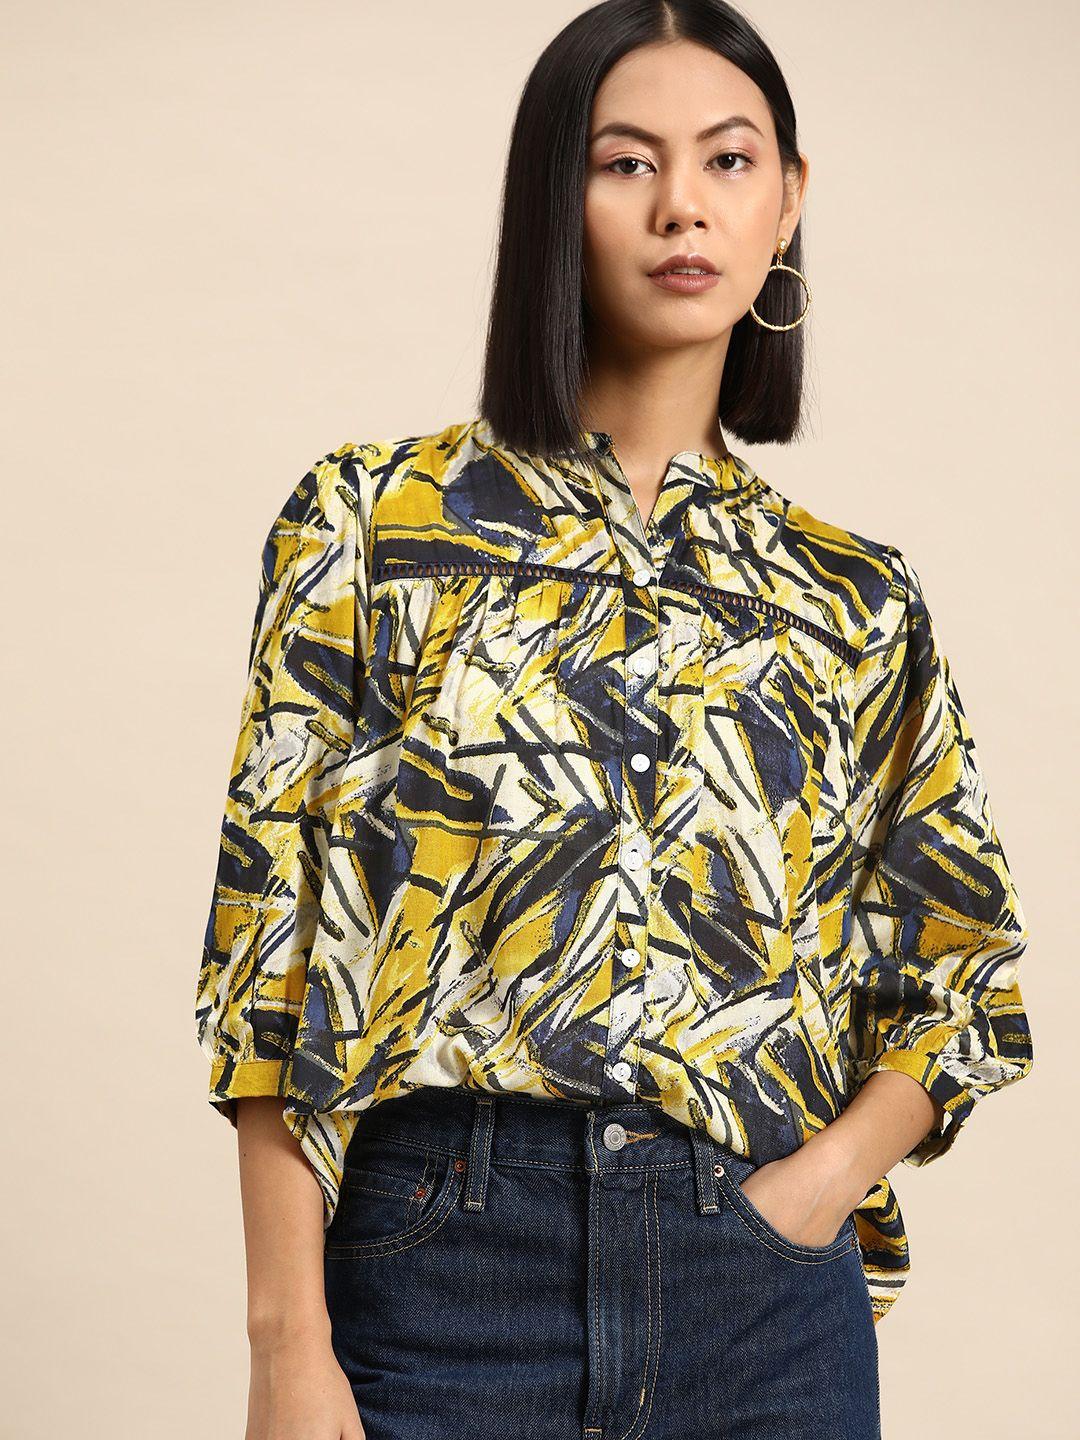 all about you printed mandarin collar puff sleeve shirt style top